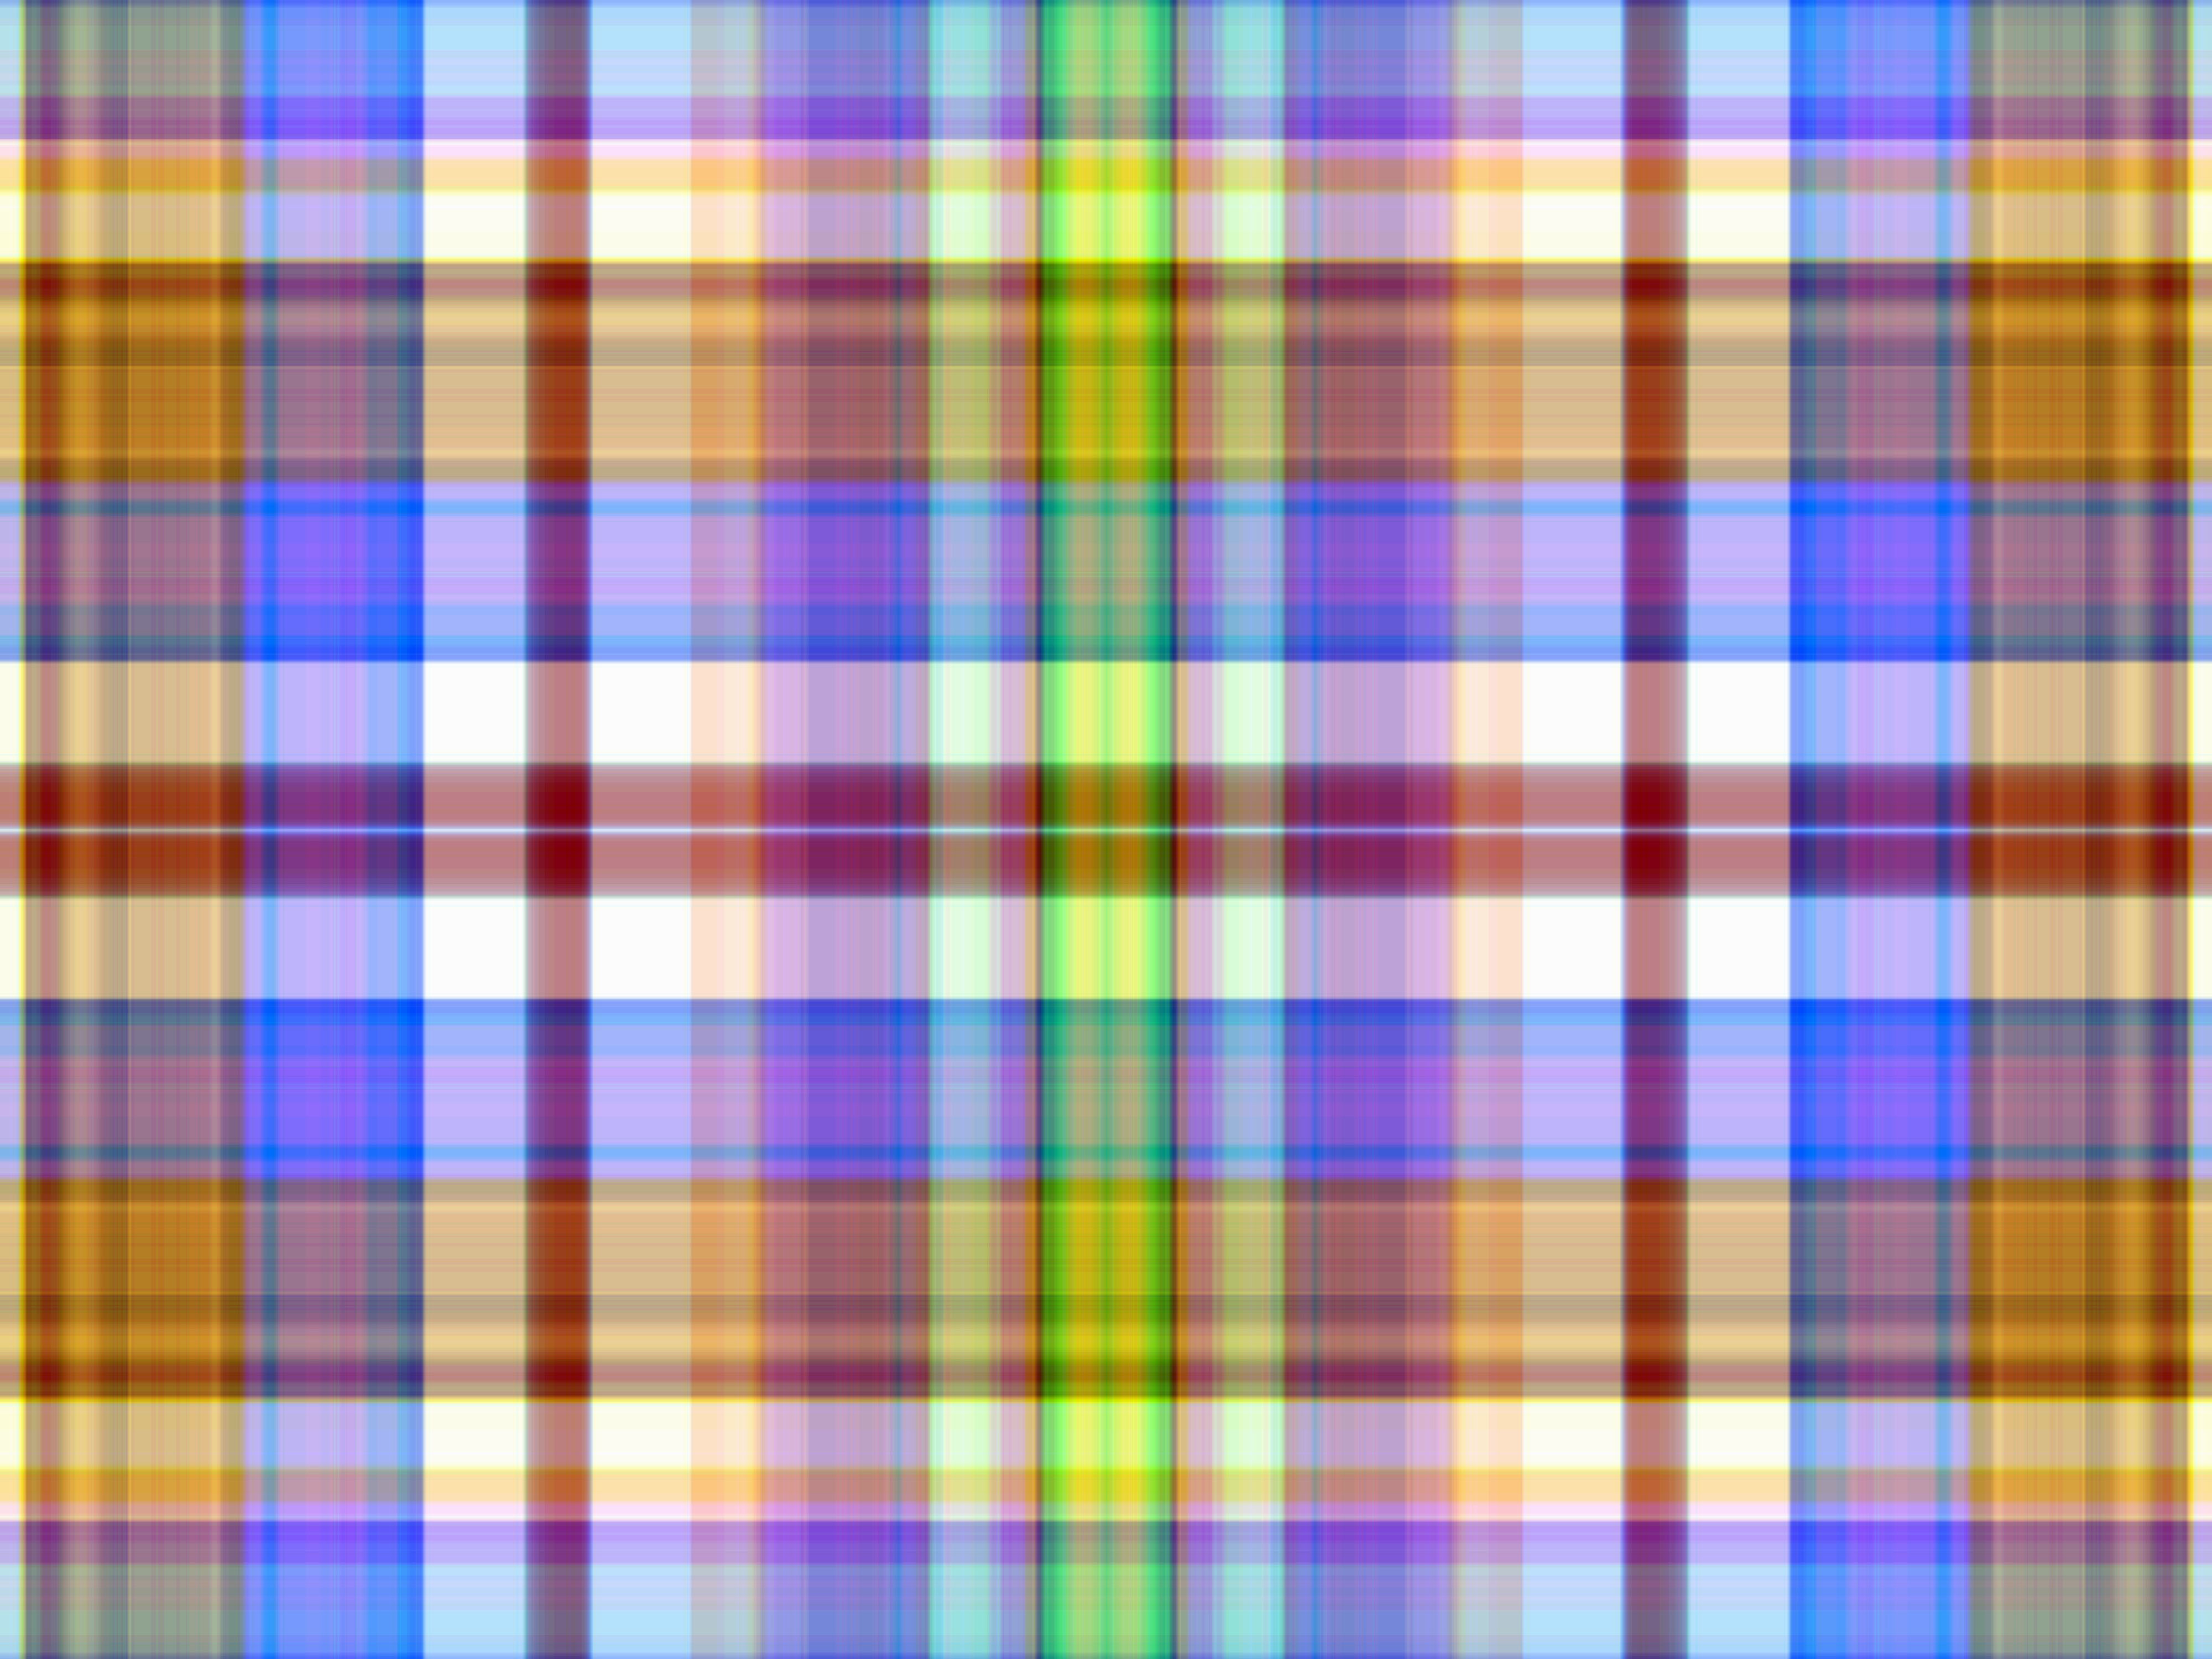 Abstract Colorful Pattern 4000x3000